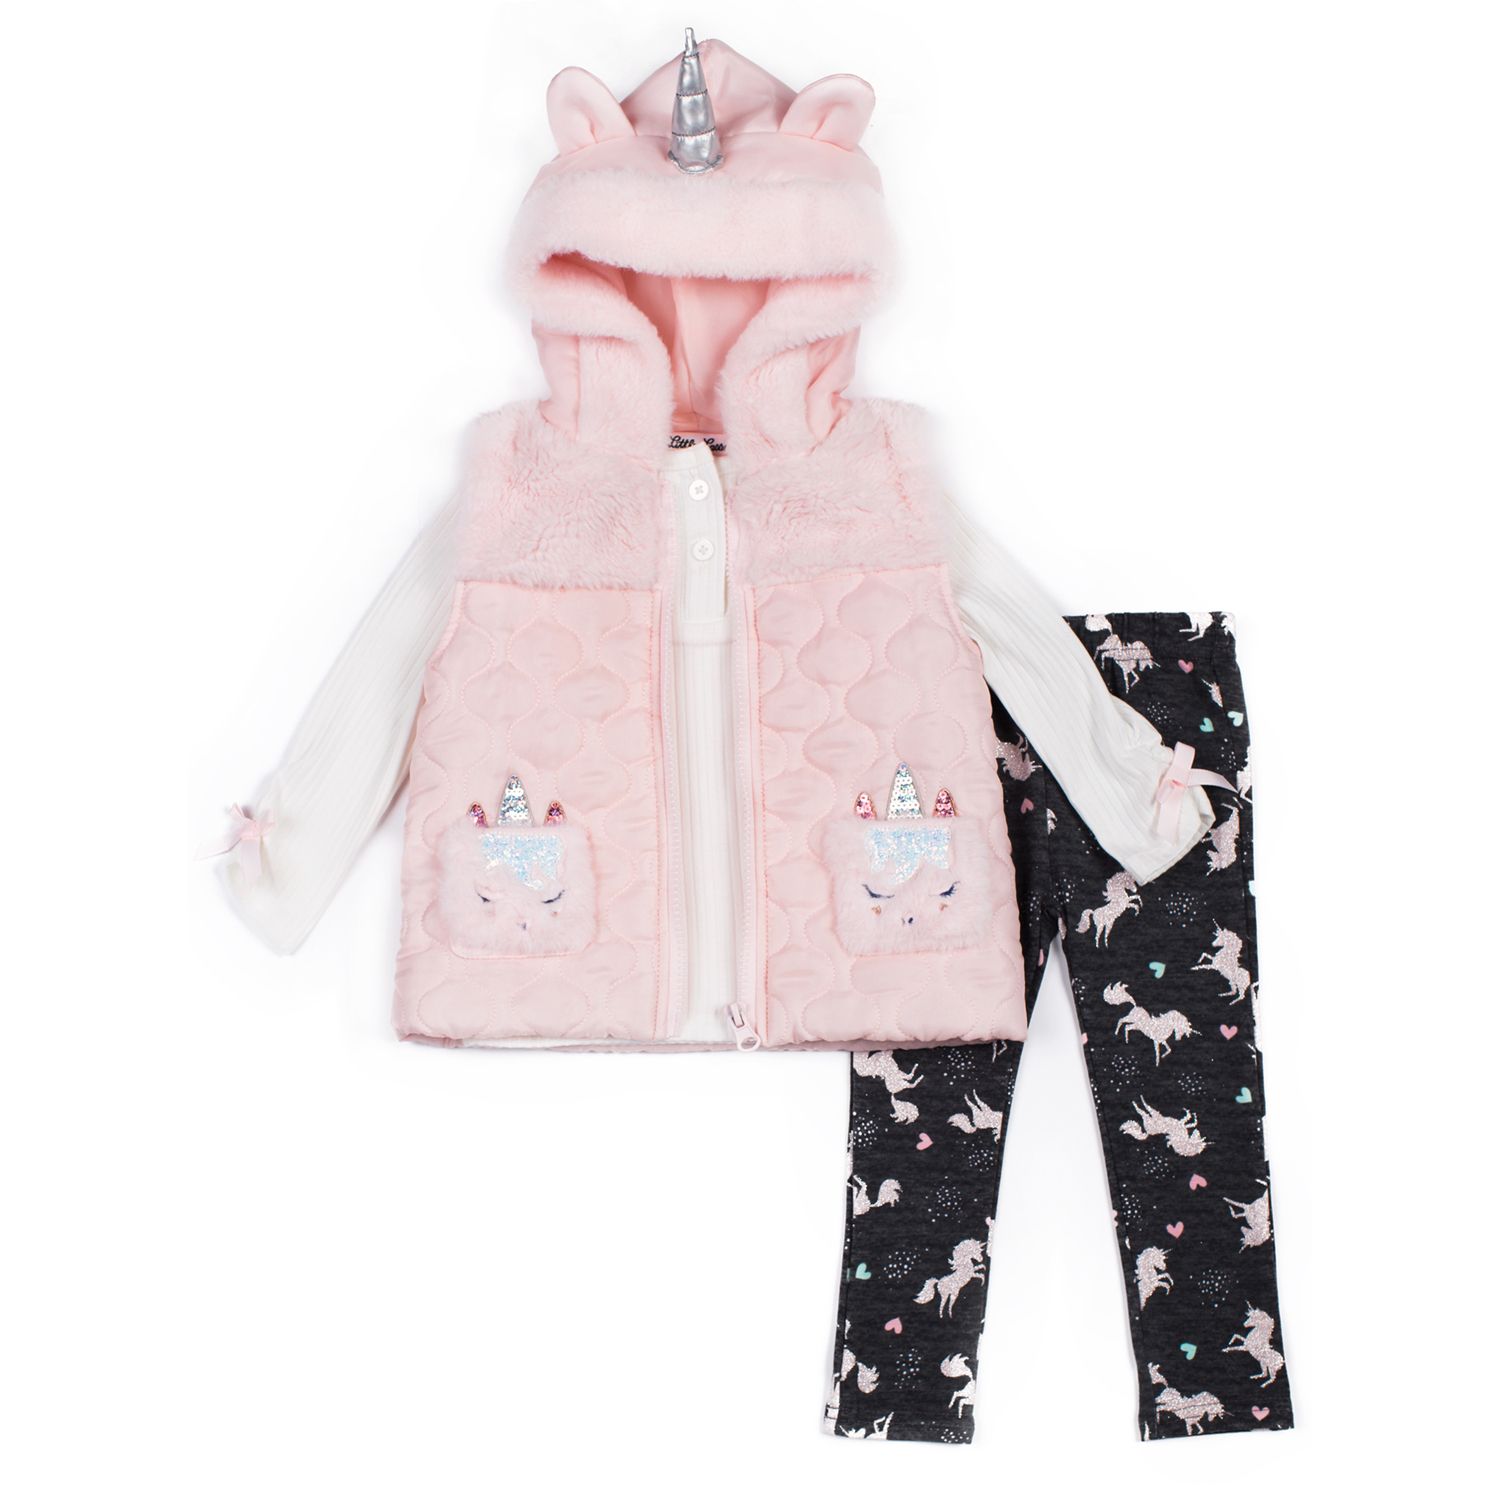 little lass baby girl clothes